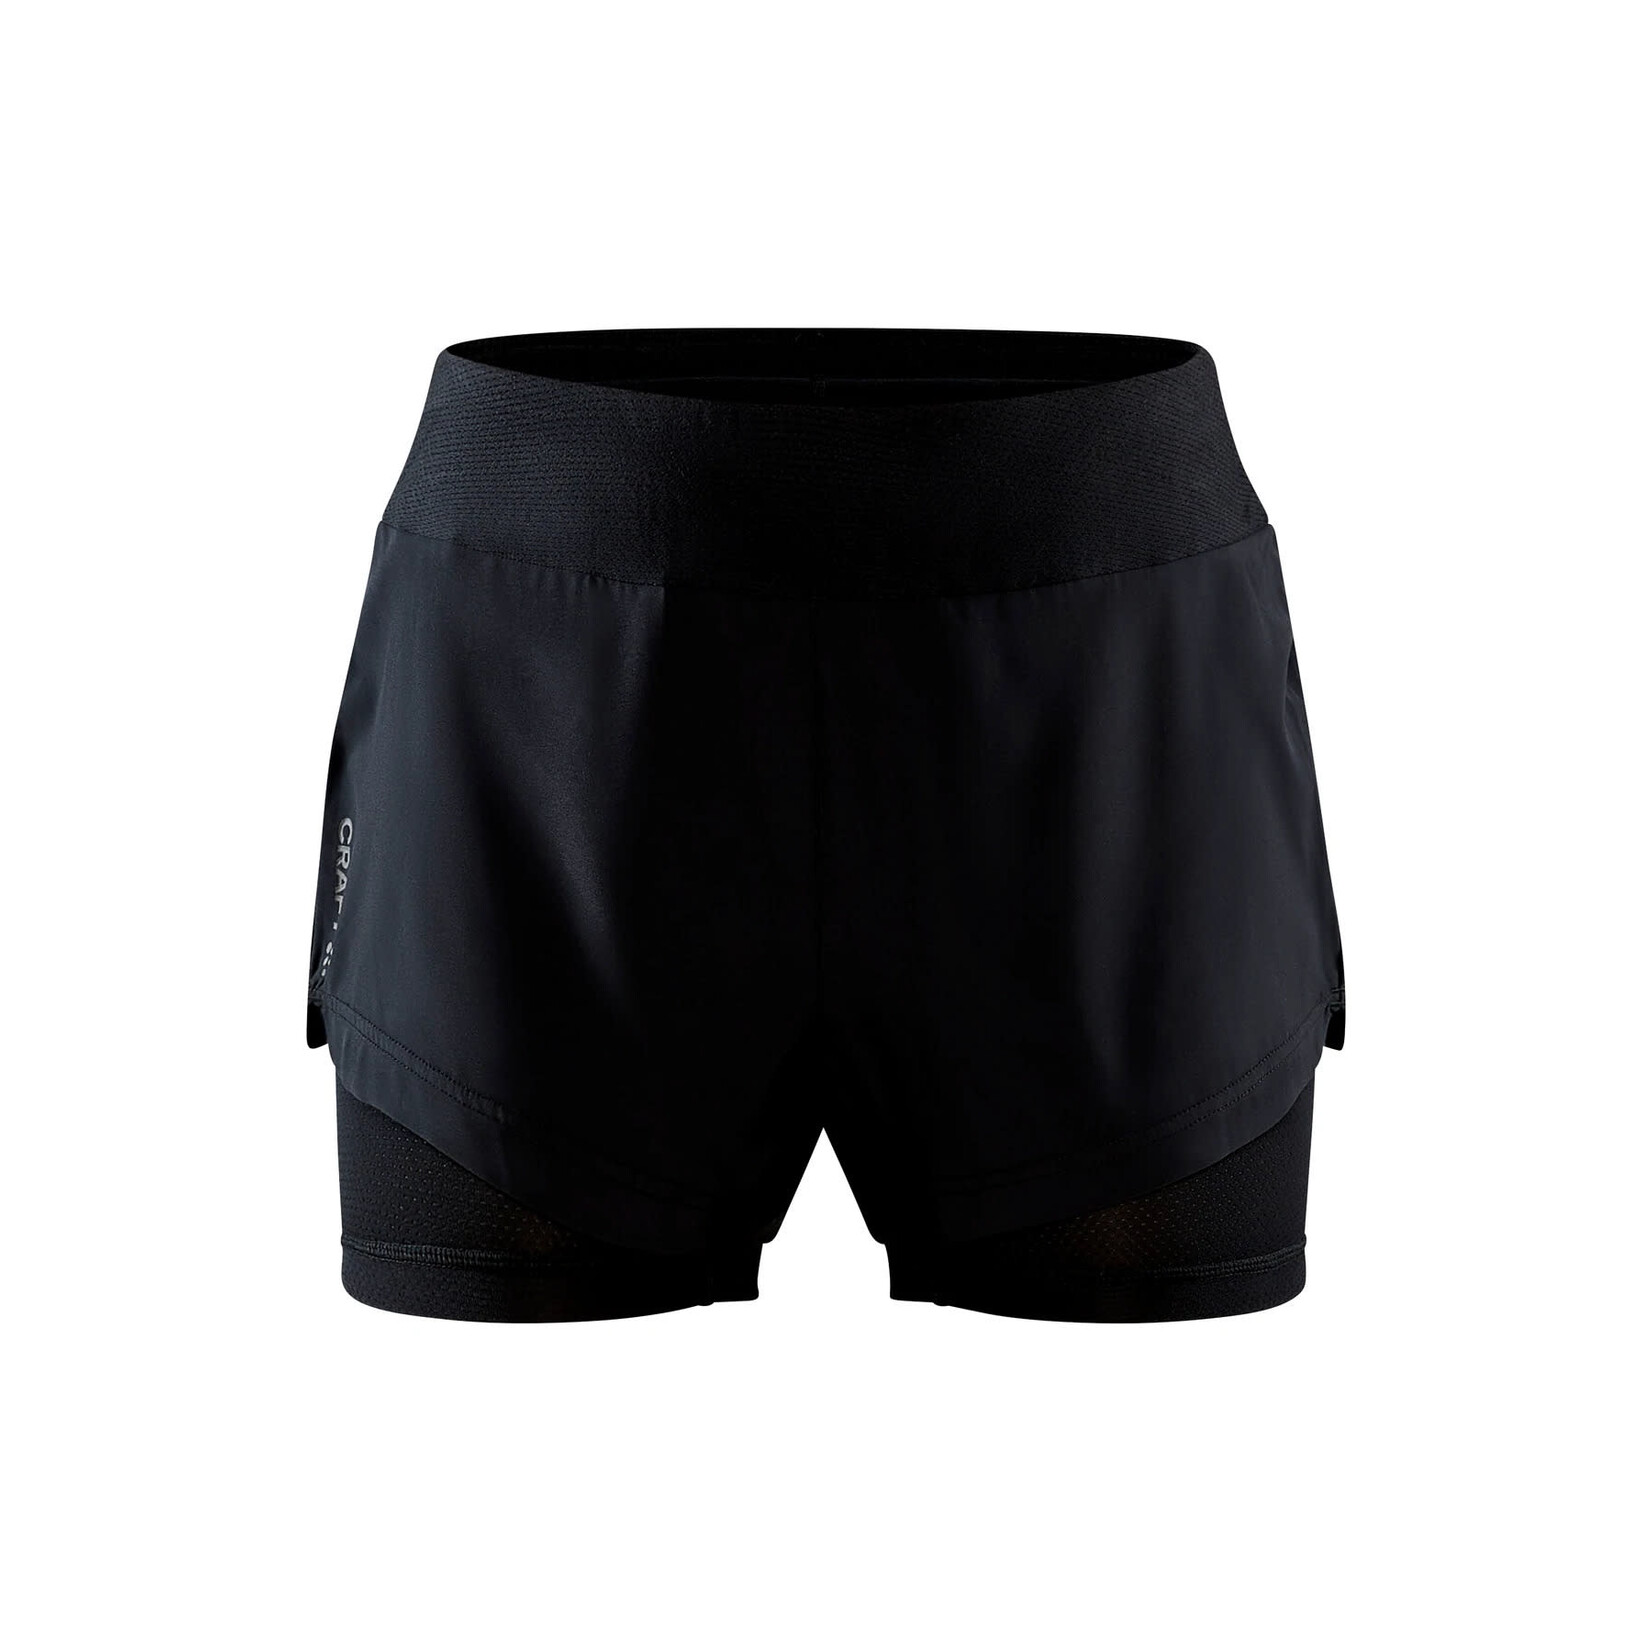 Craft Shorts Adv Essence 2-in-1 pour femmes